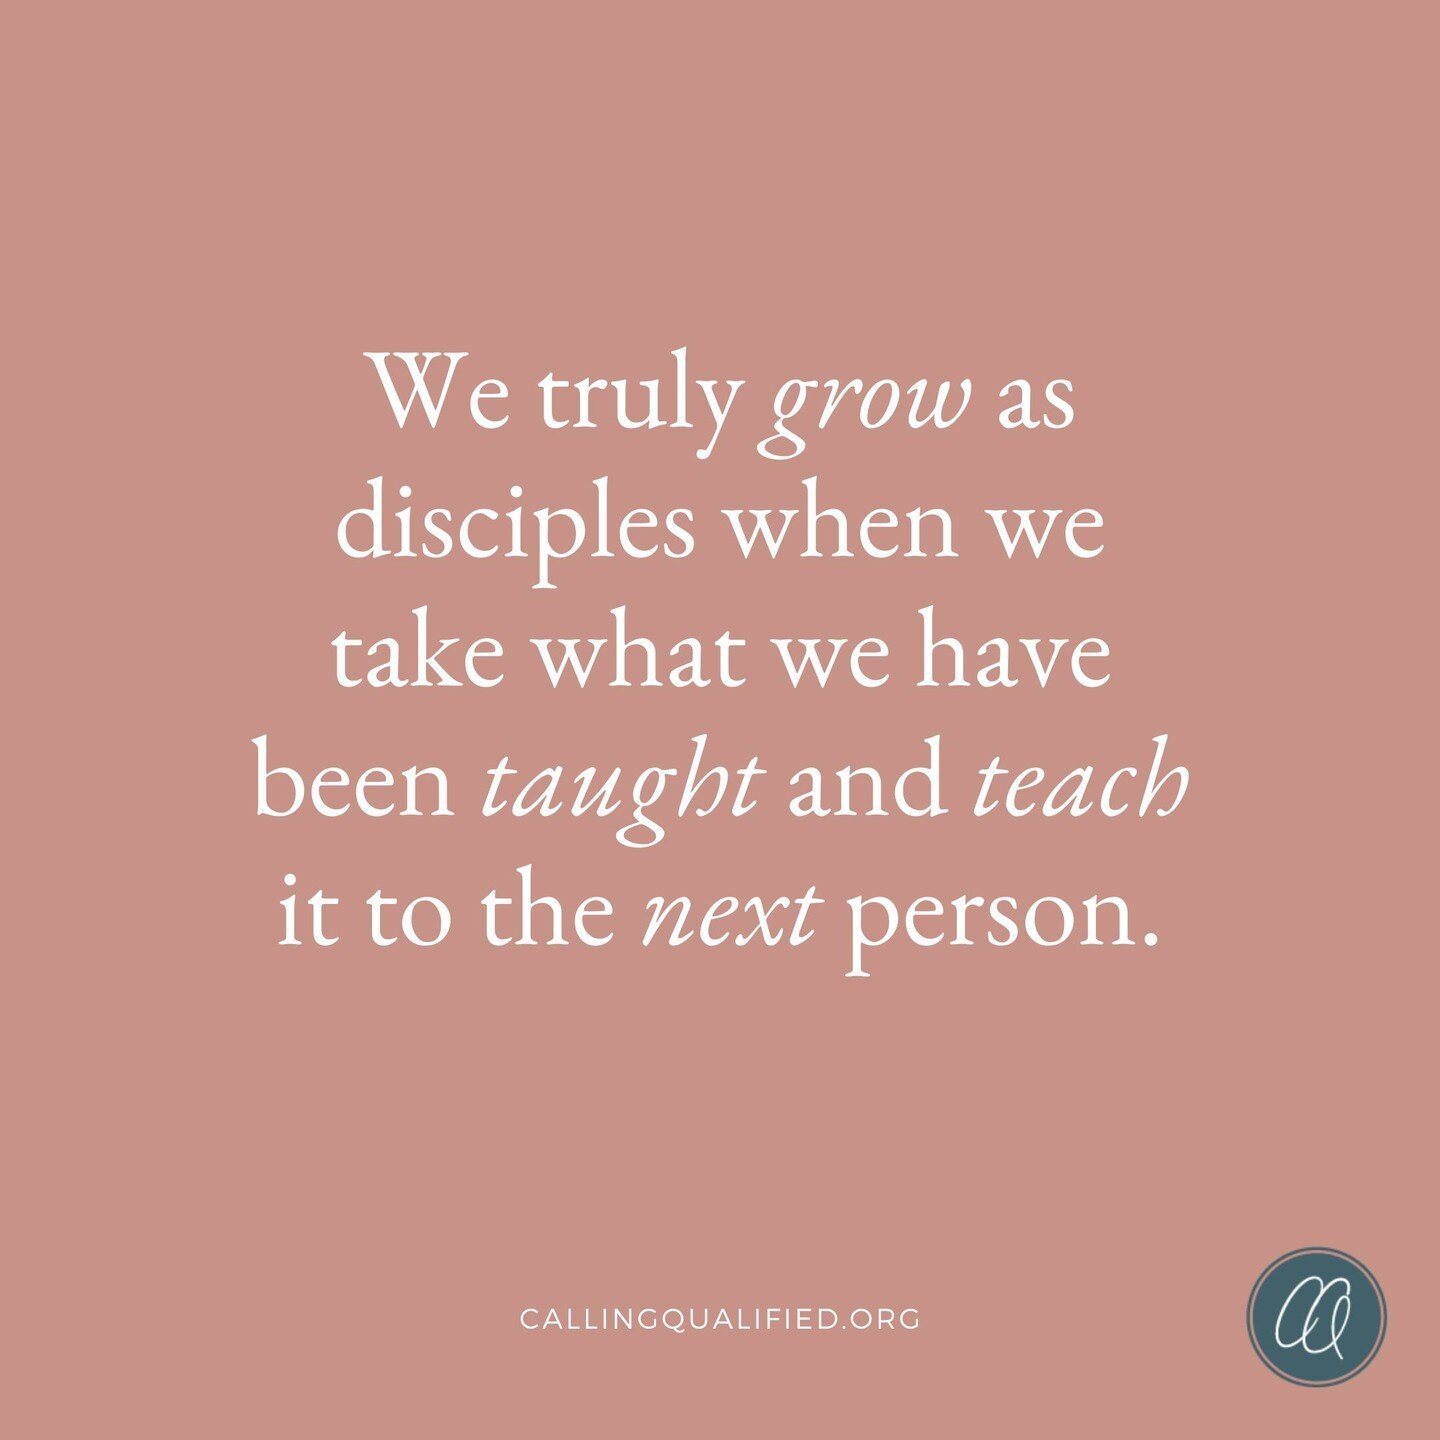 Jesus' call to make disciples is crucial. In the last moments spent with His disciples after 3 years together; He could have chosen to say so many different things to them.

But as He readied Himself to go back to His Father, He had but one instructi